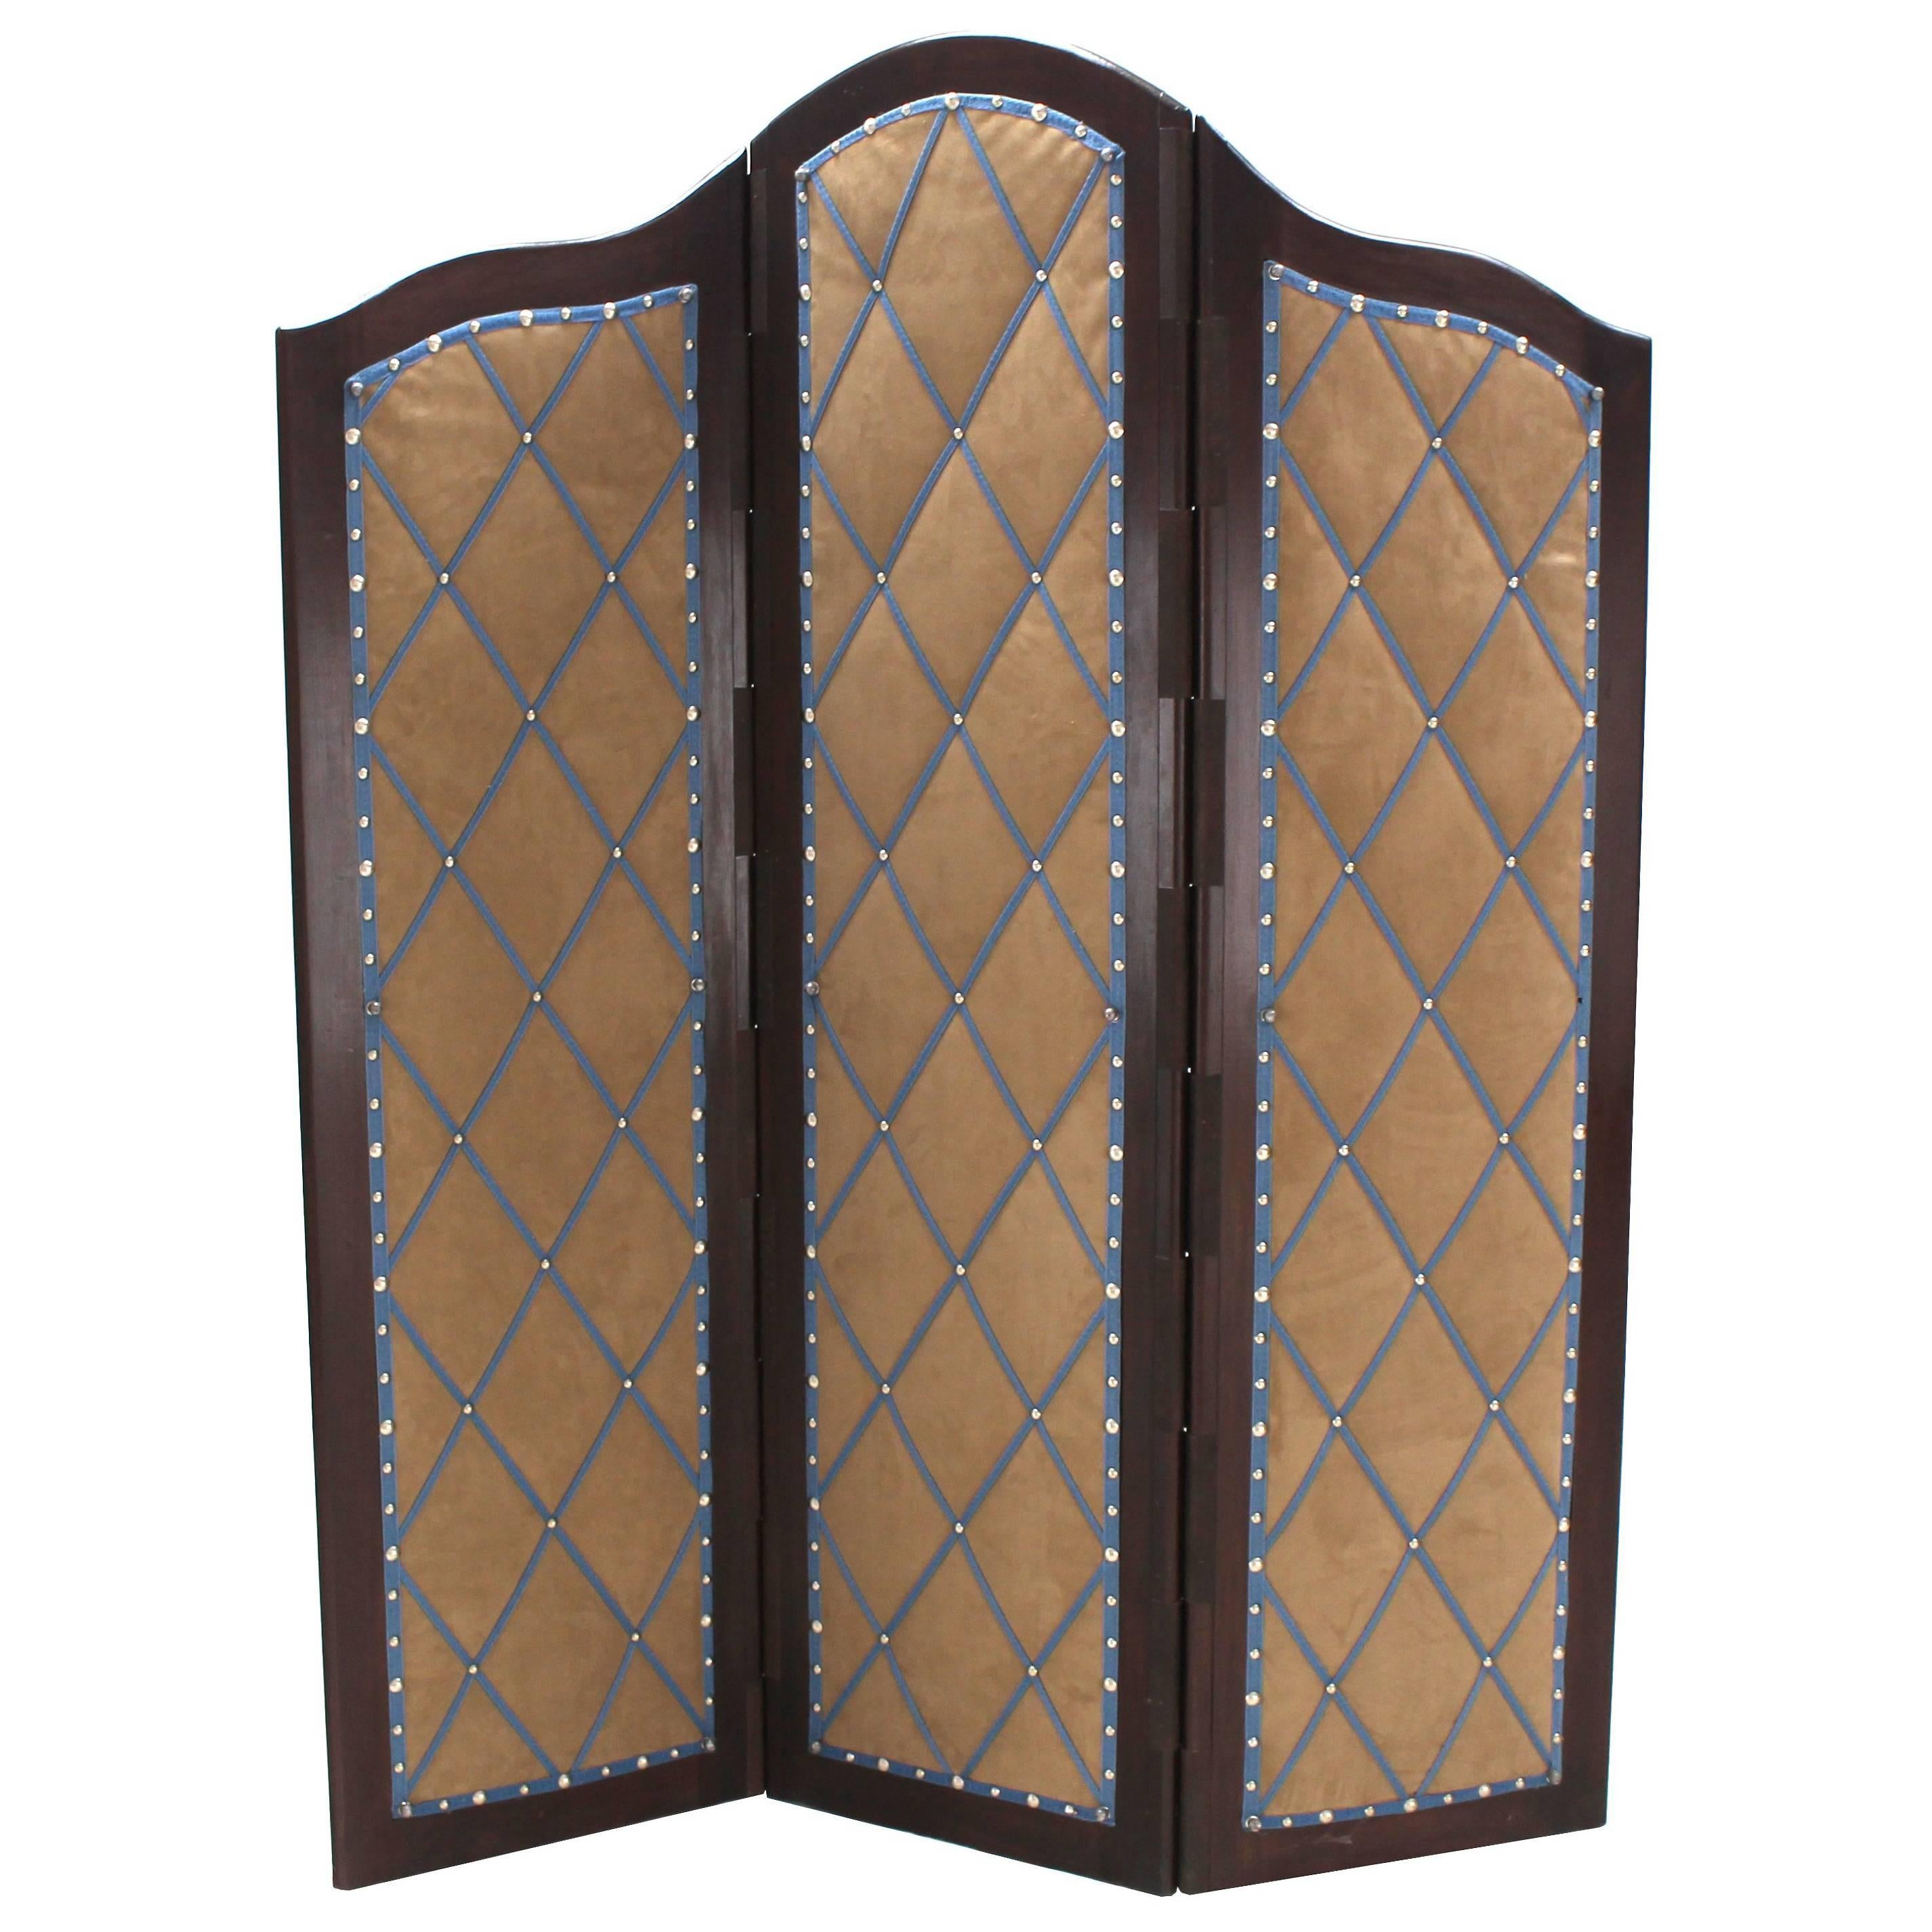 Decorative Carved and Upholstered Screen Room Divider